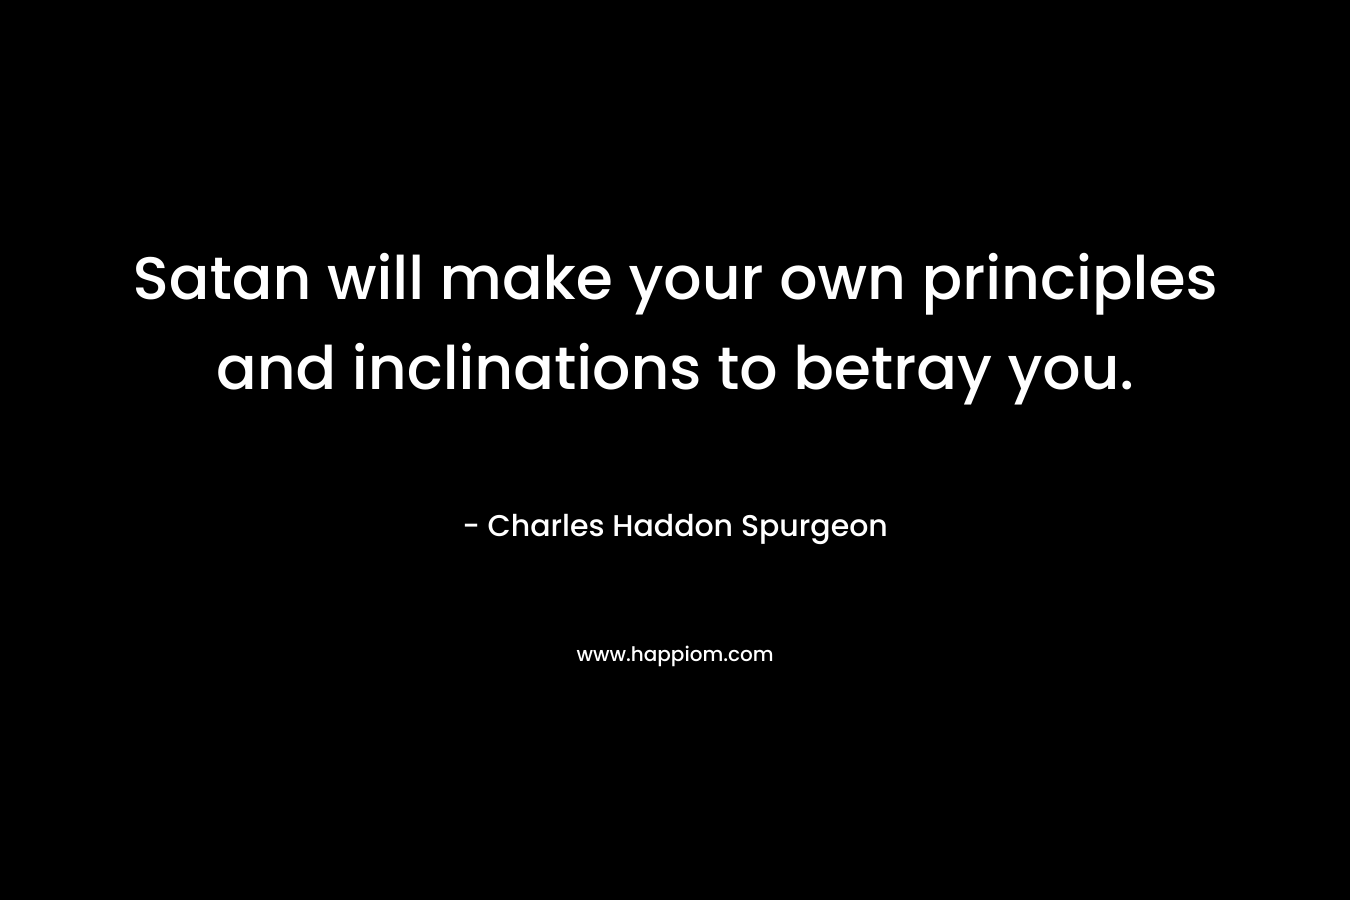 Satan will make your own principles and inclinations to betray you. – Charles Haddon Spurgeon